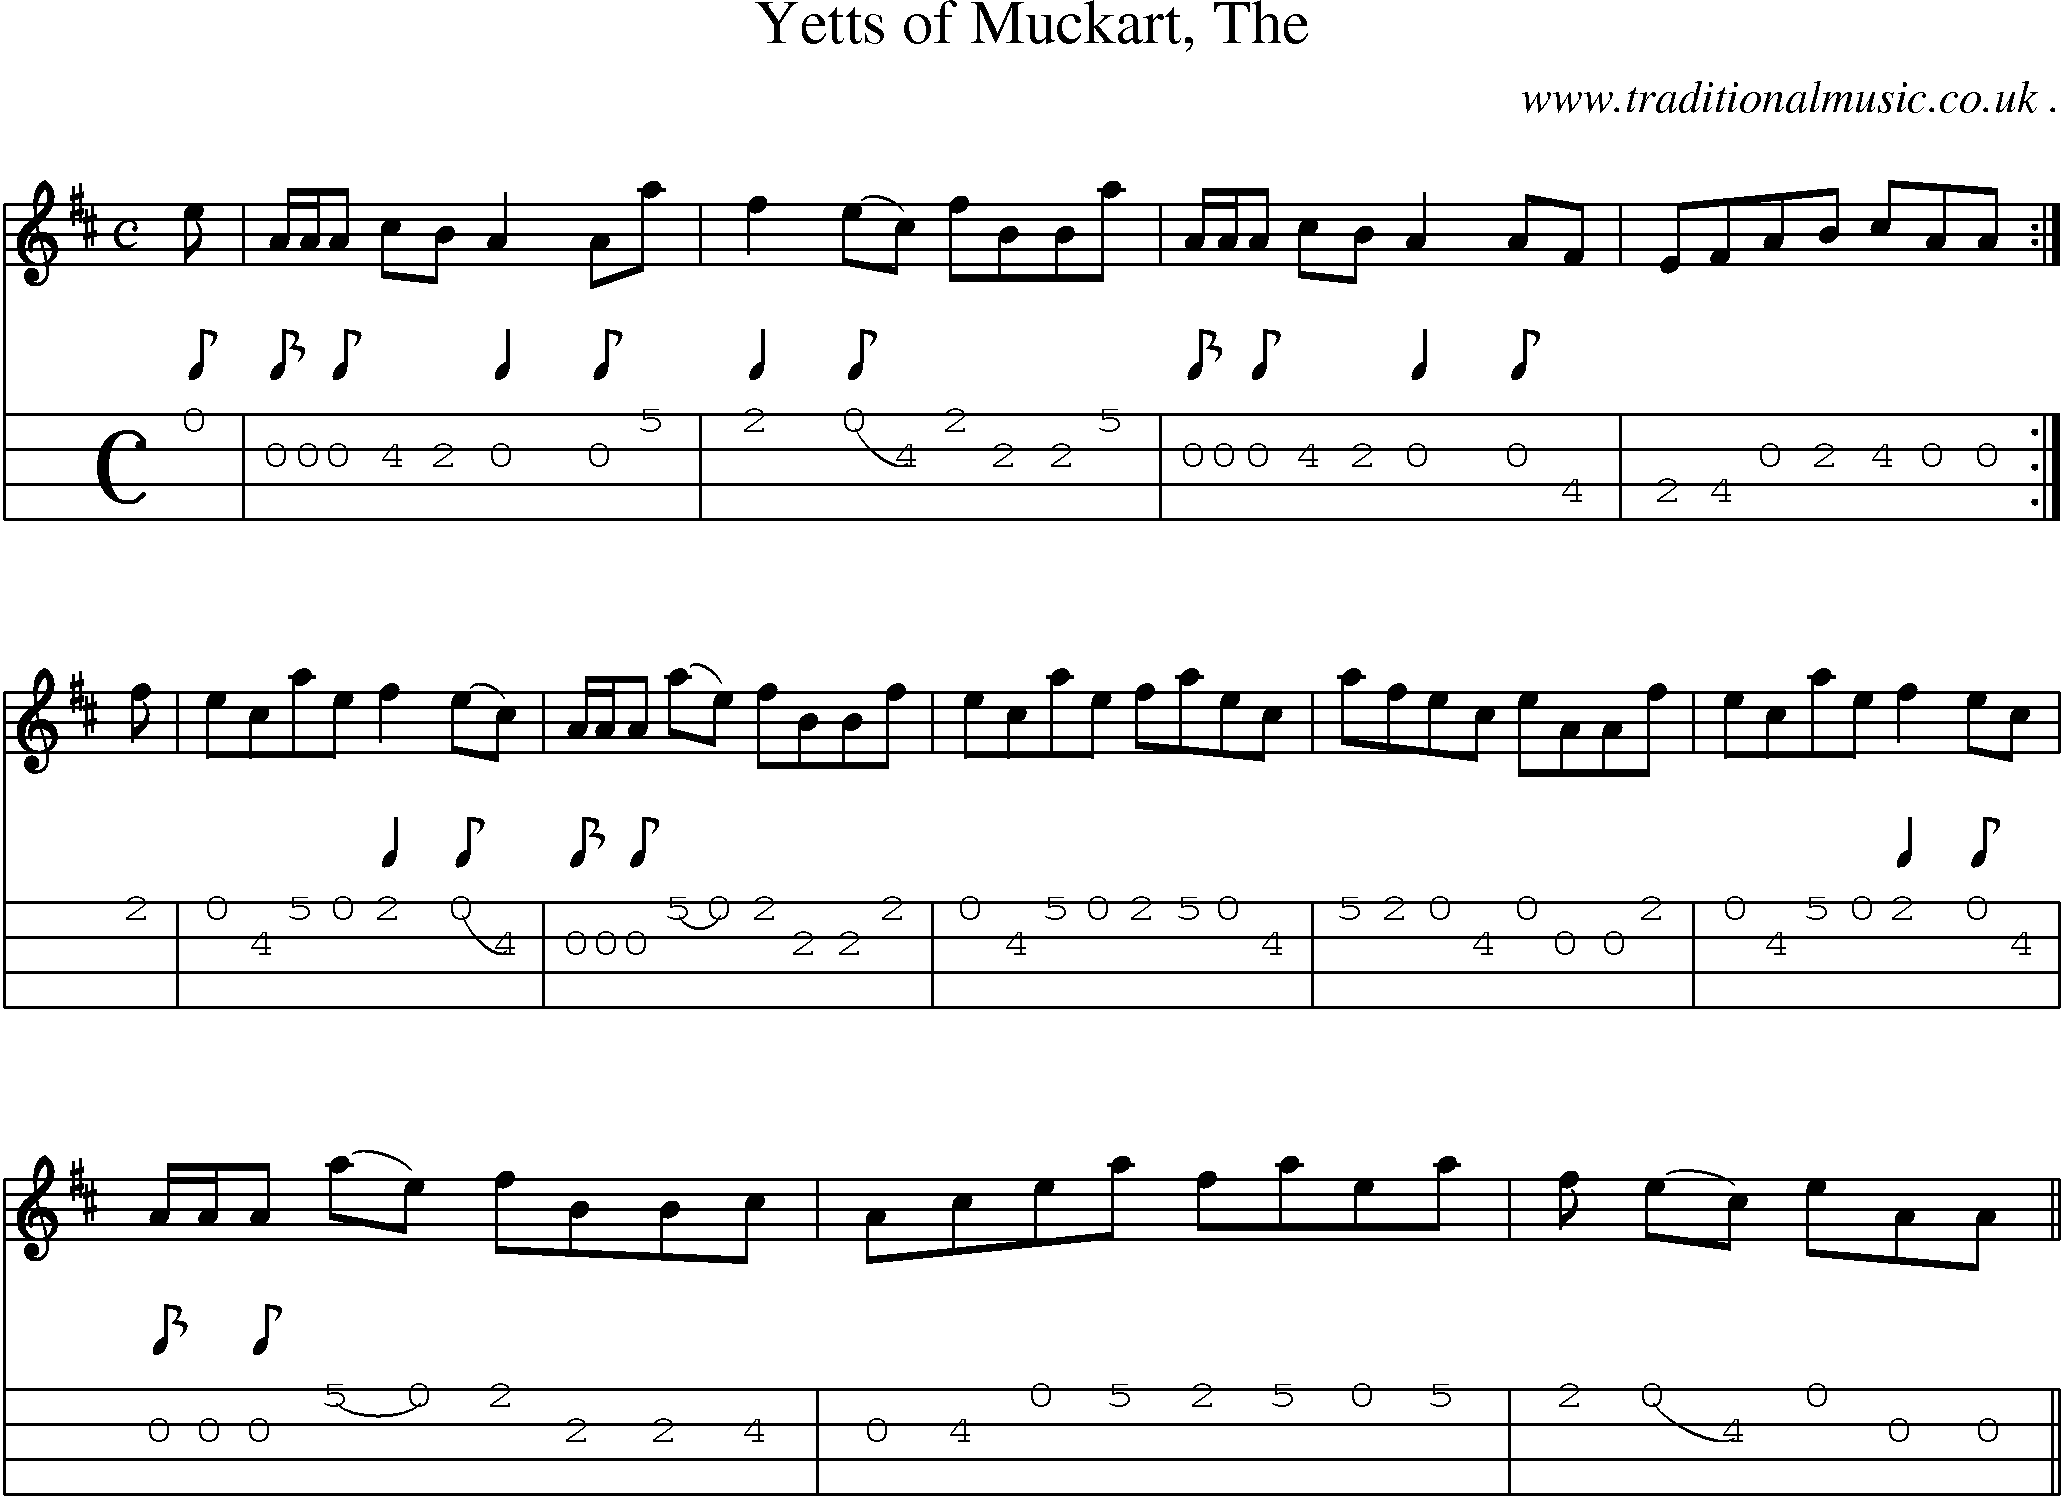 Sheet-music  score, Chords and Mandolin Tabs for Yetts Of Muckart The